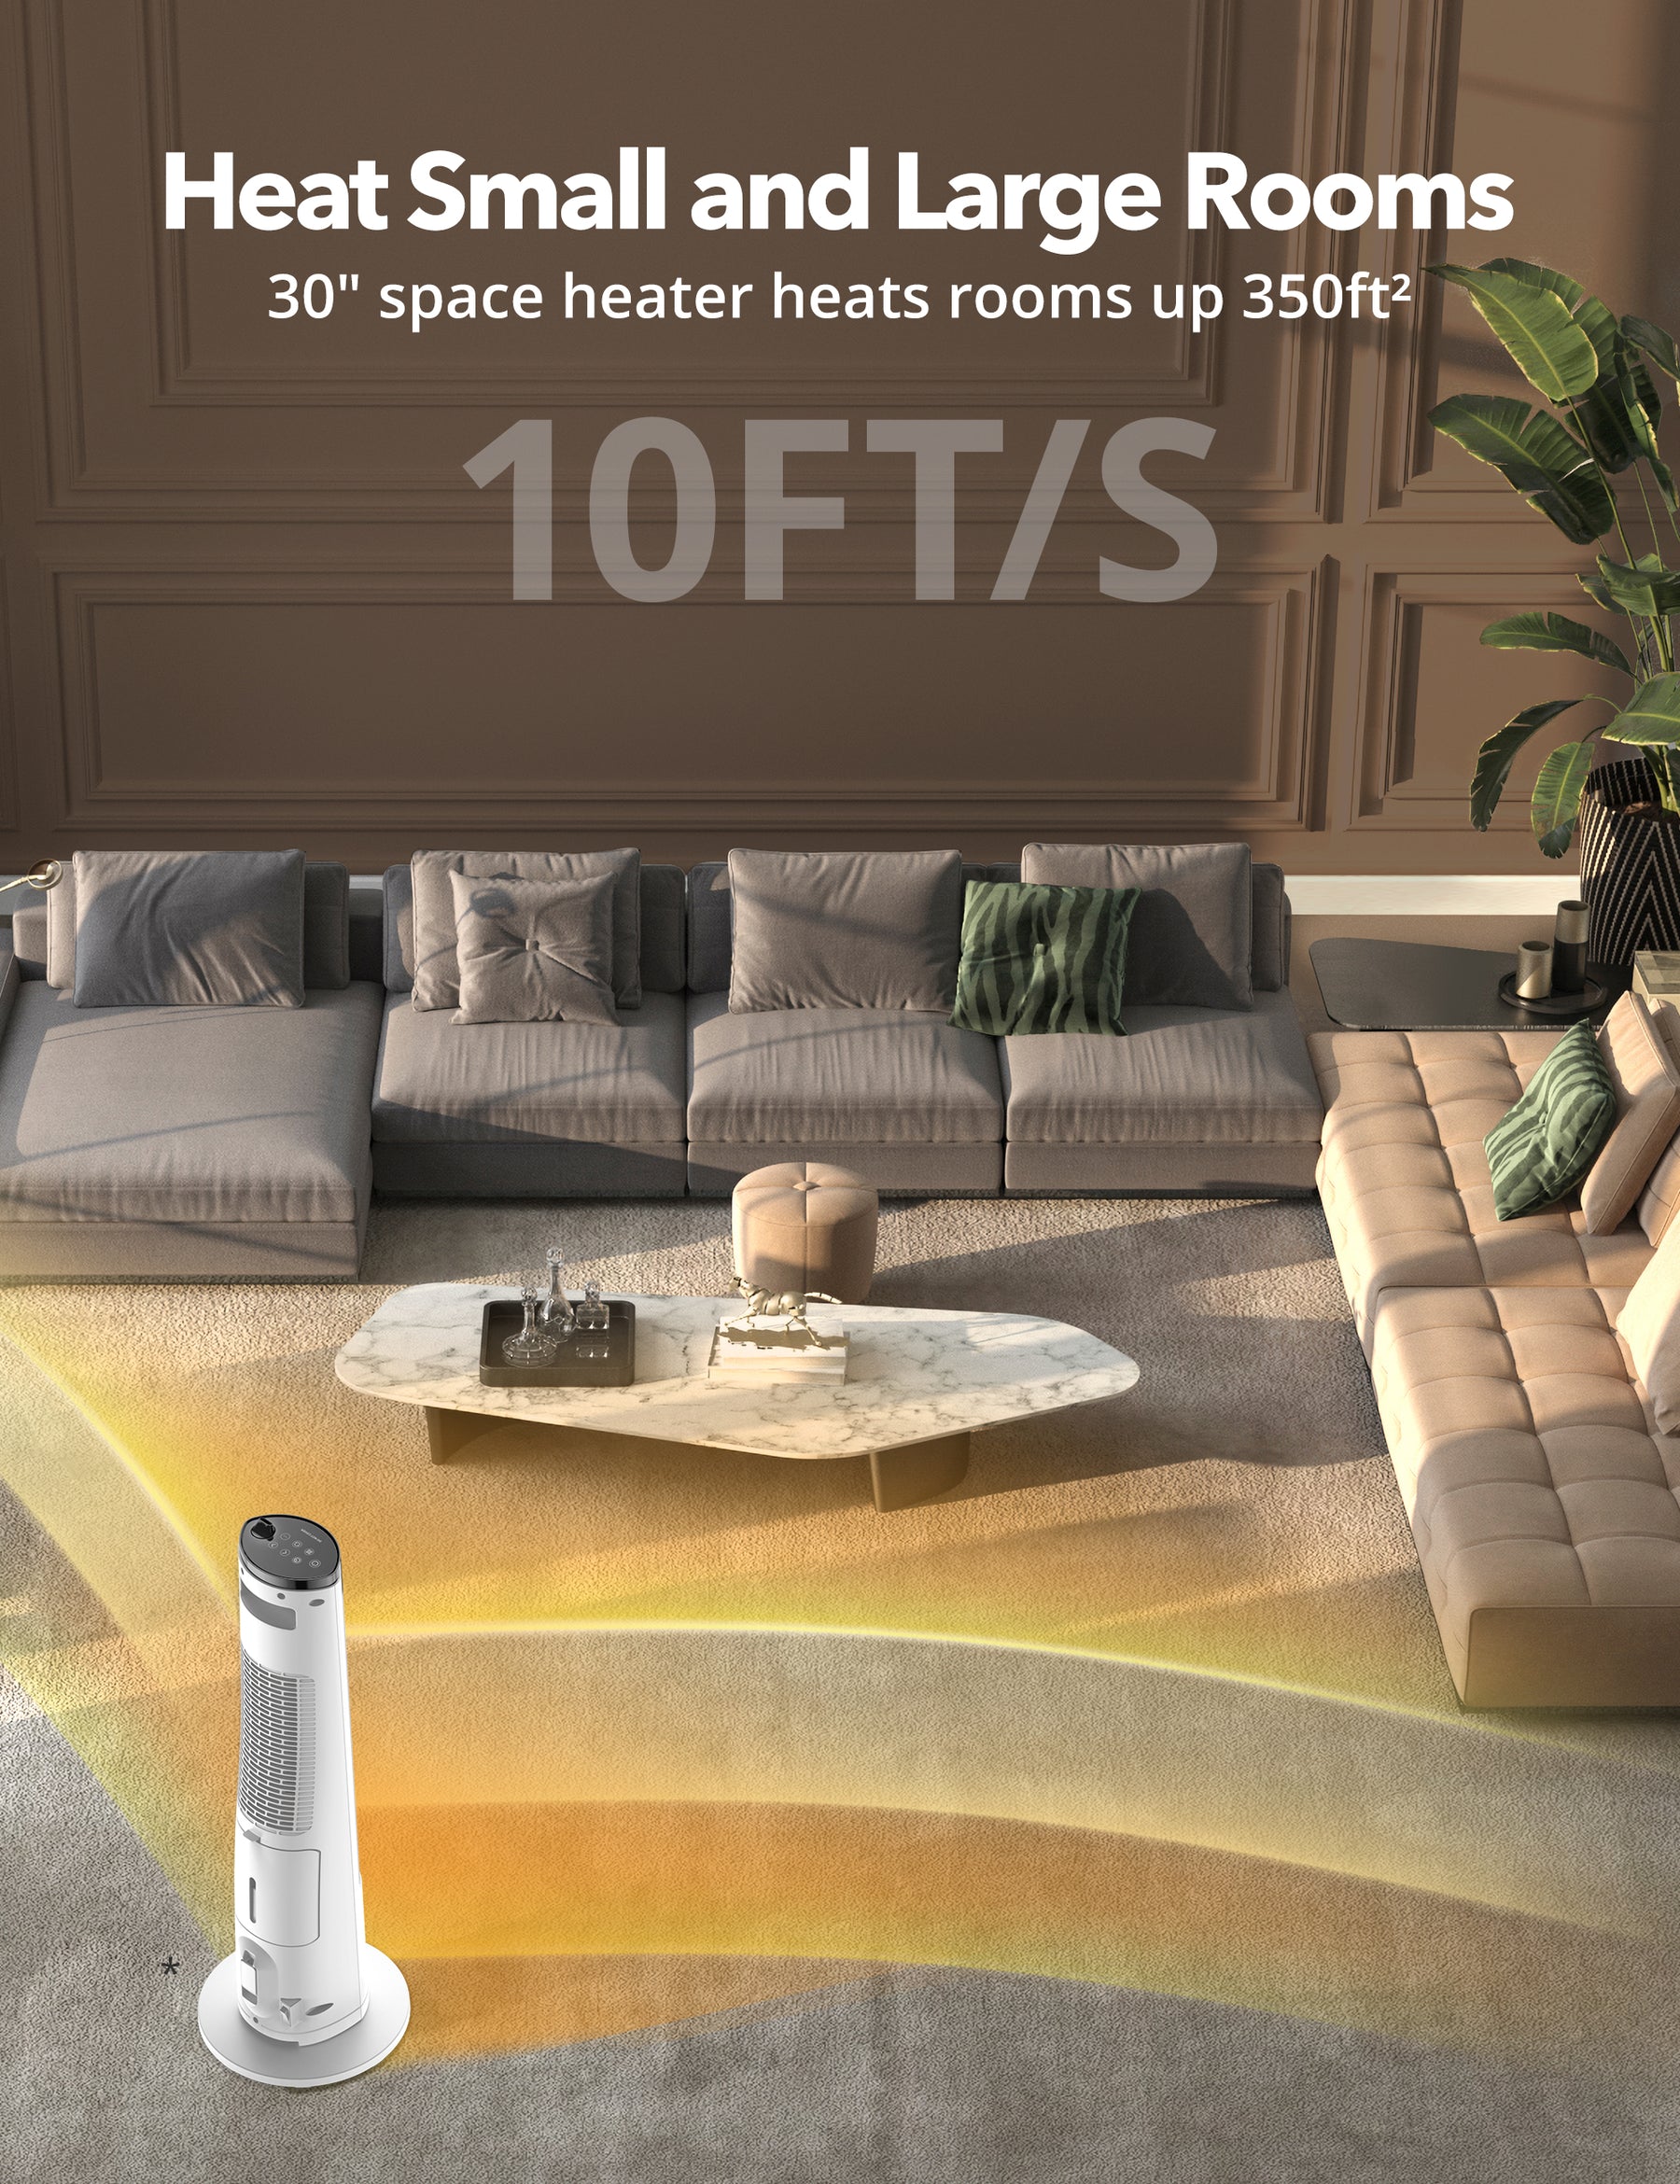 TaoTronics 30" Space Heater & Humidifier 019, 1500W Whole Room Heater with 1L Water Tank for Home